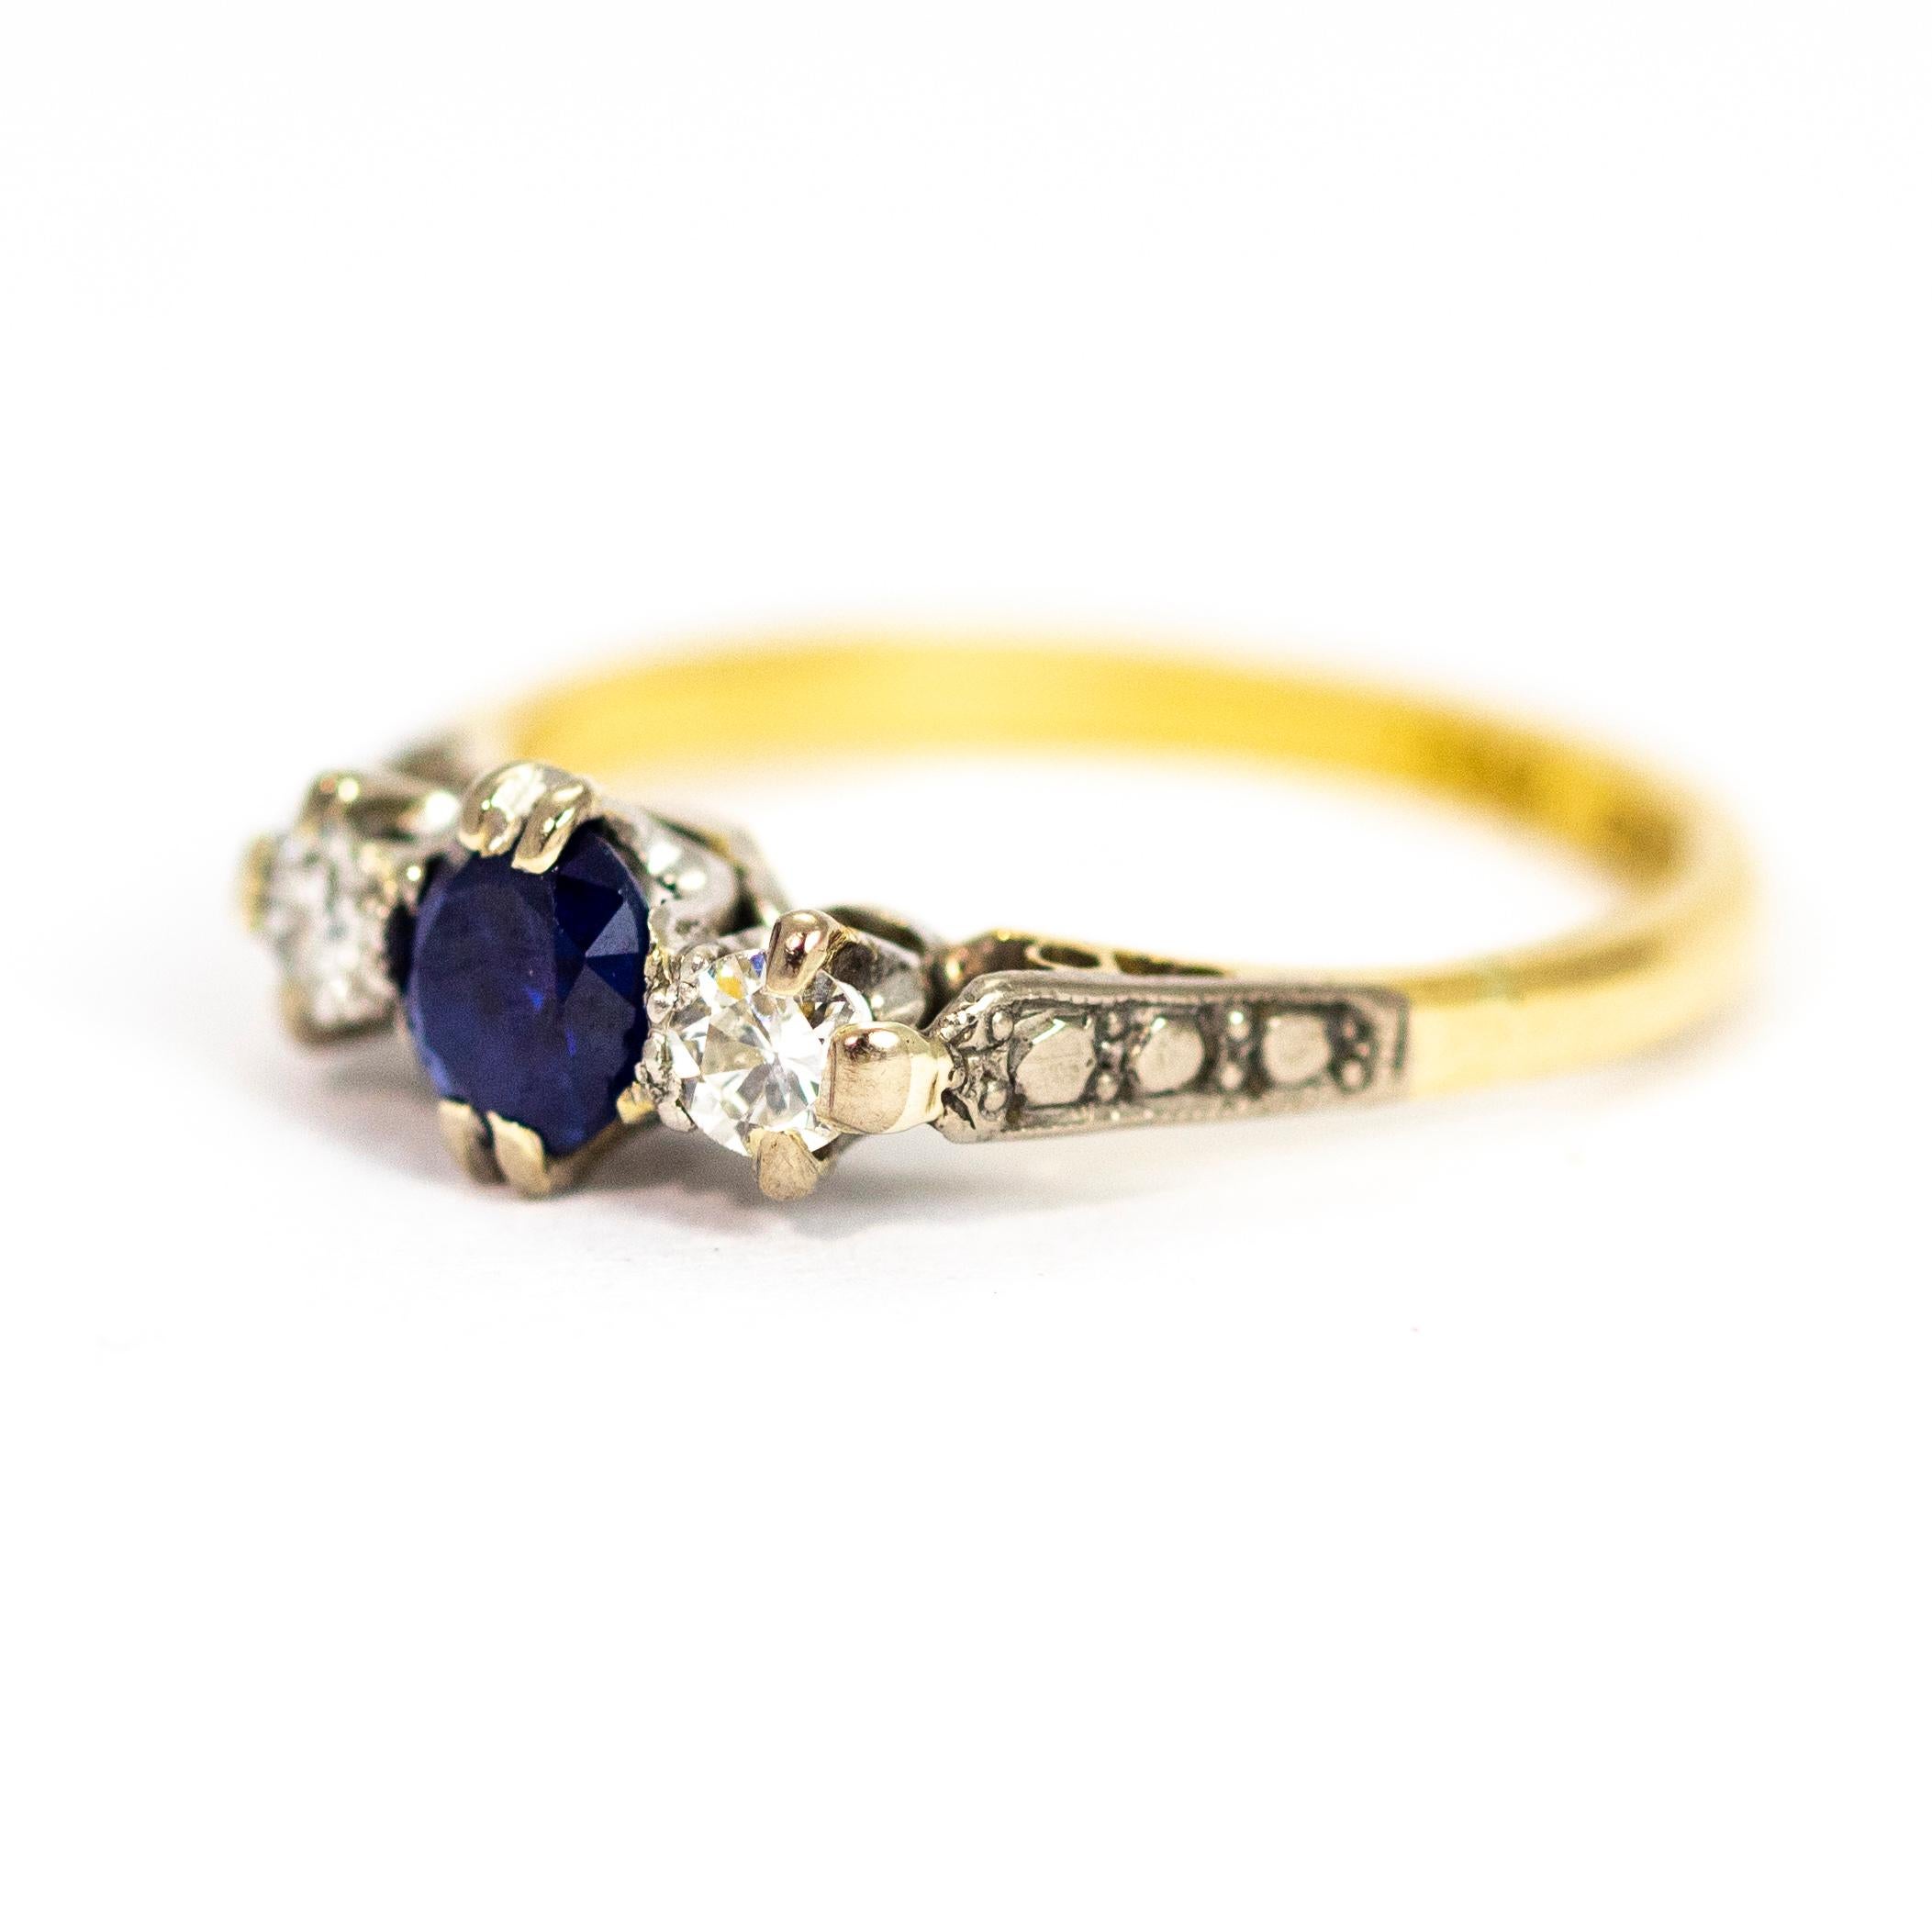 A superb vintage three-stone ring. The beautiful central blue sapphire measures 40 points and is flanked either side by stunning 15 point white diamonds. The stones are set in platinum between wonderful platinum studded shoulders. The band and is